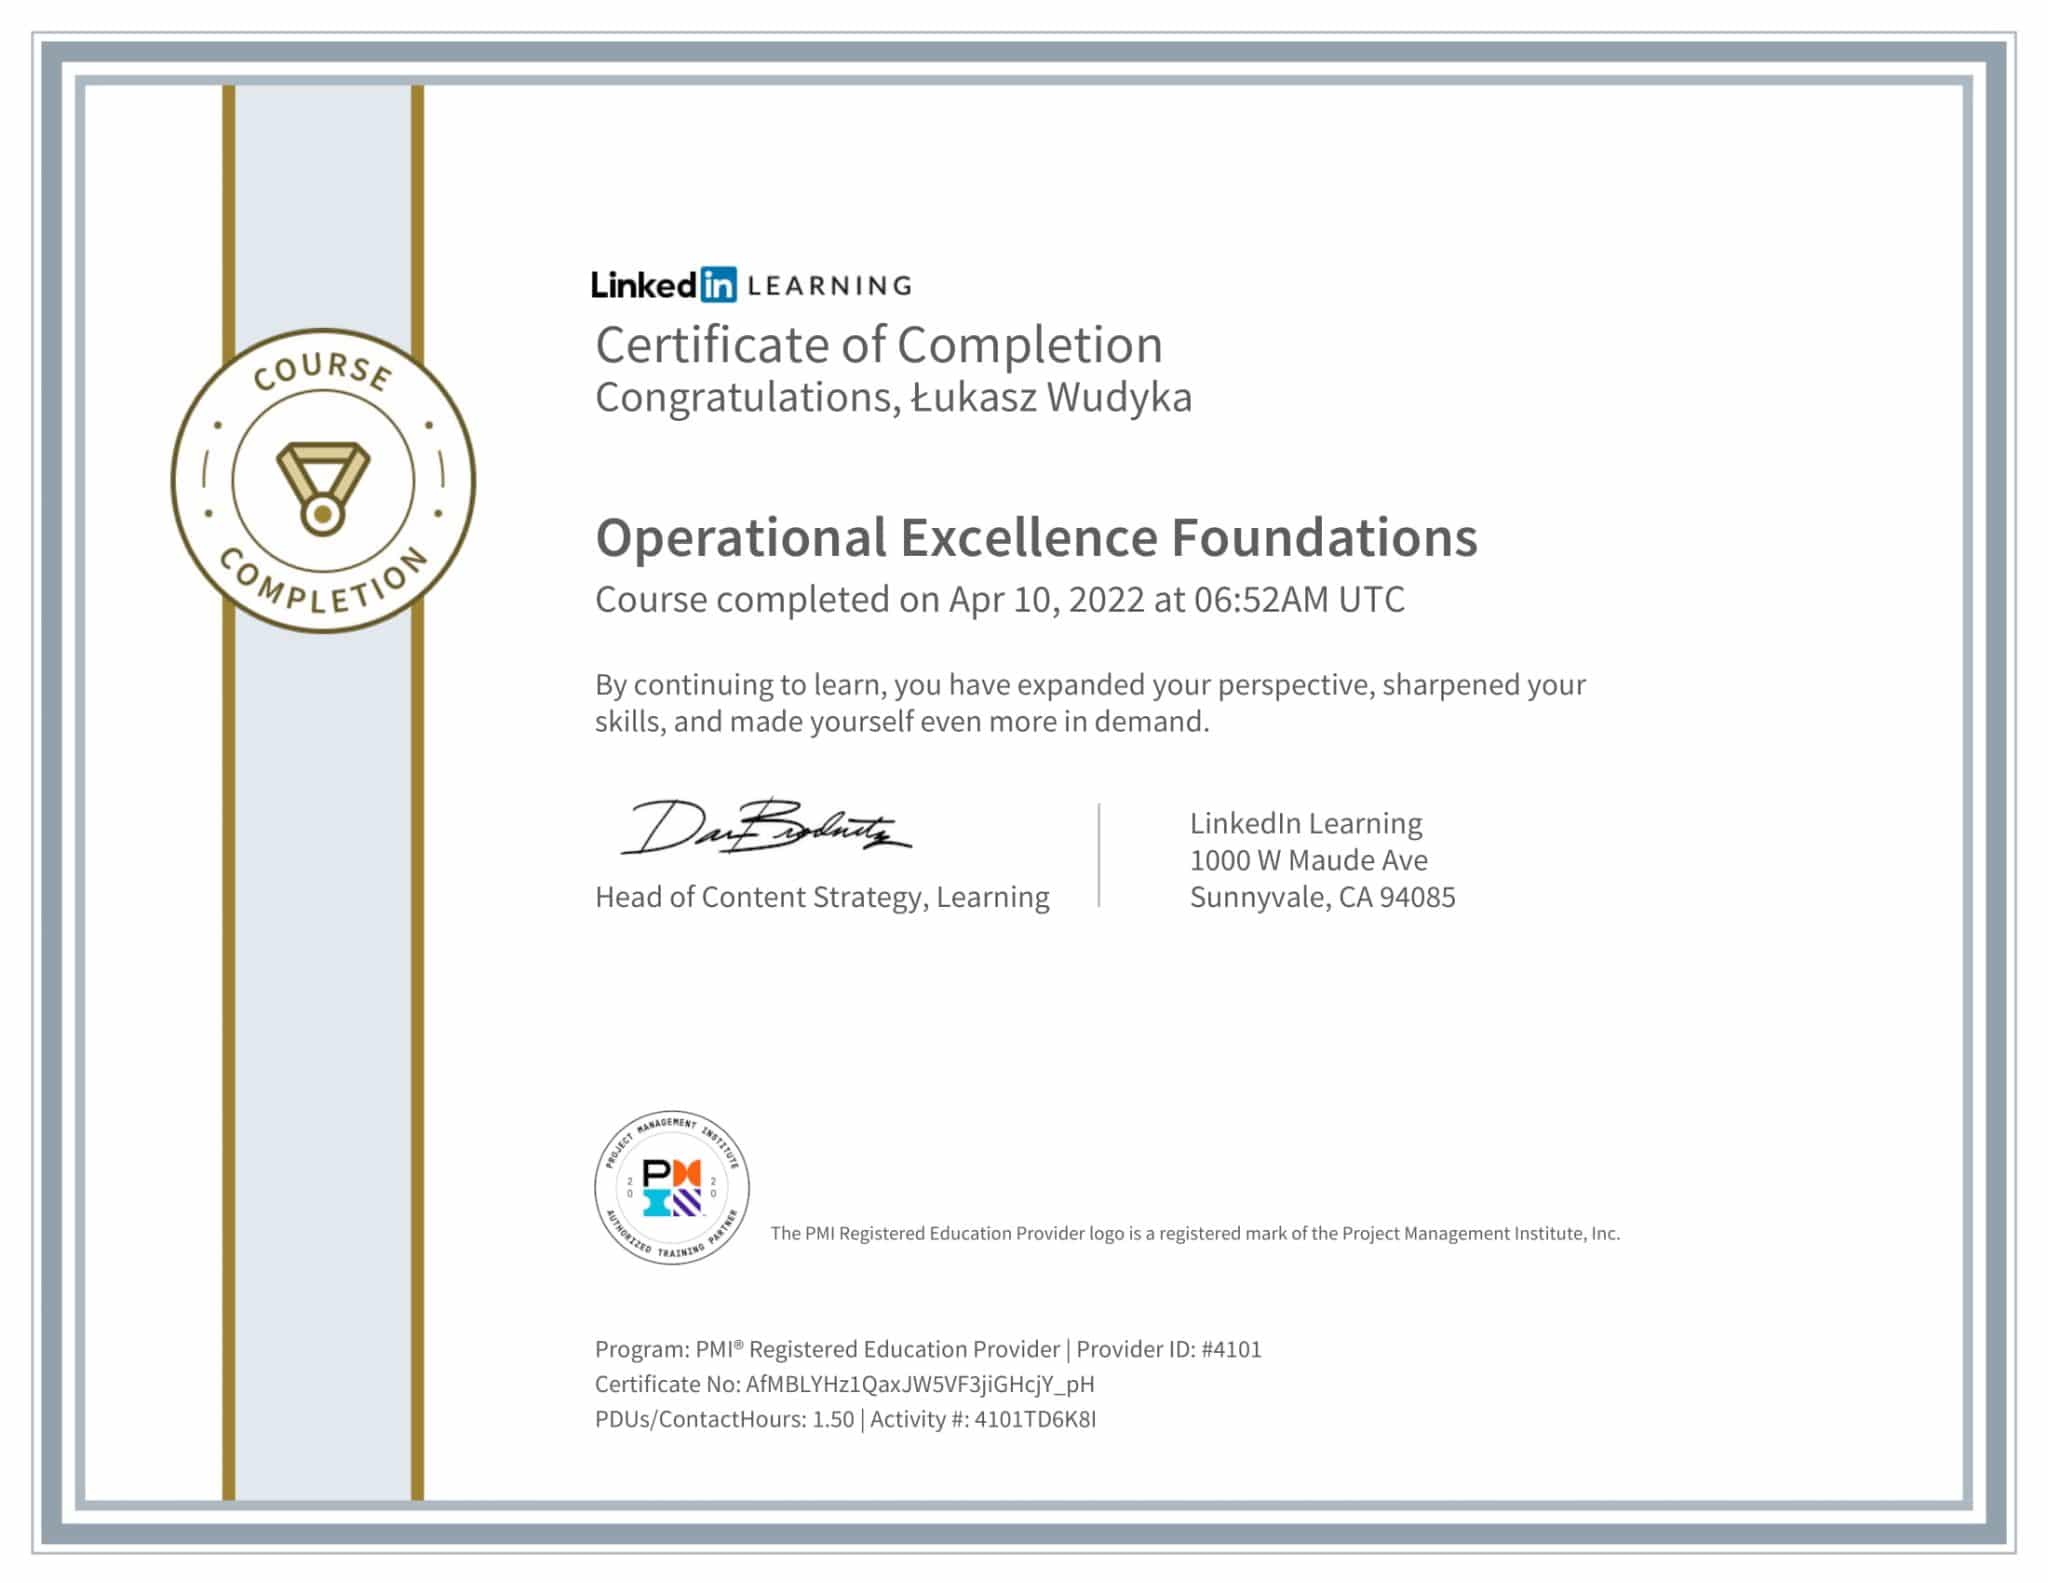 CertificateOfCompletion_Operational Excellence Foundations-1